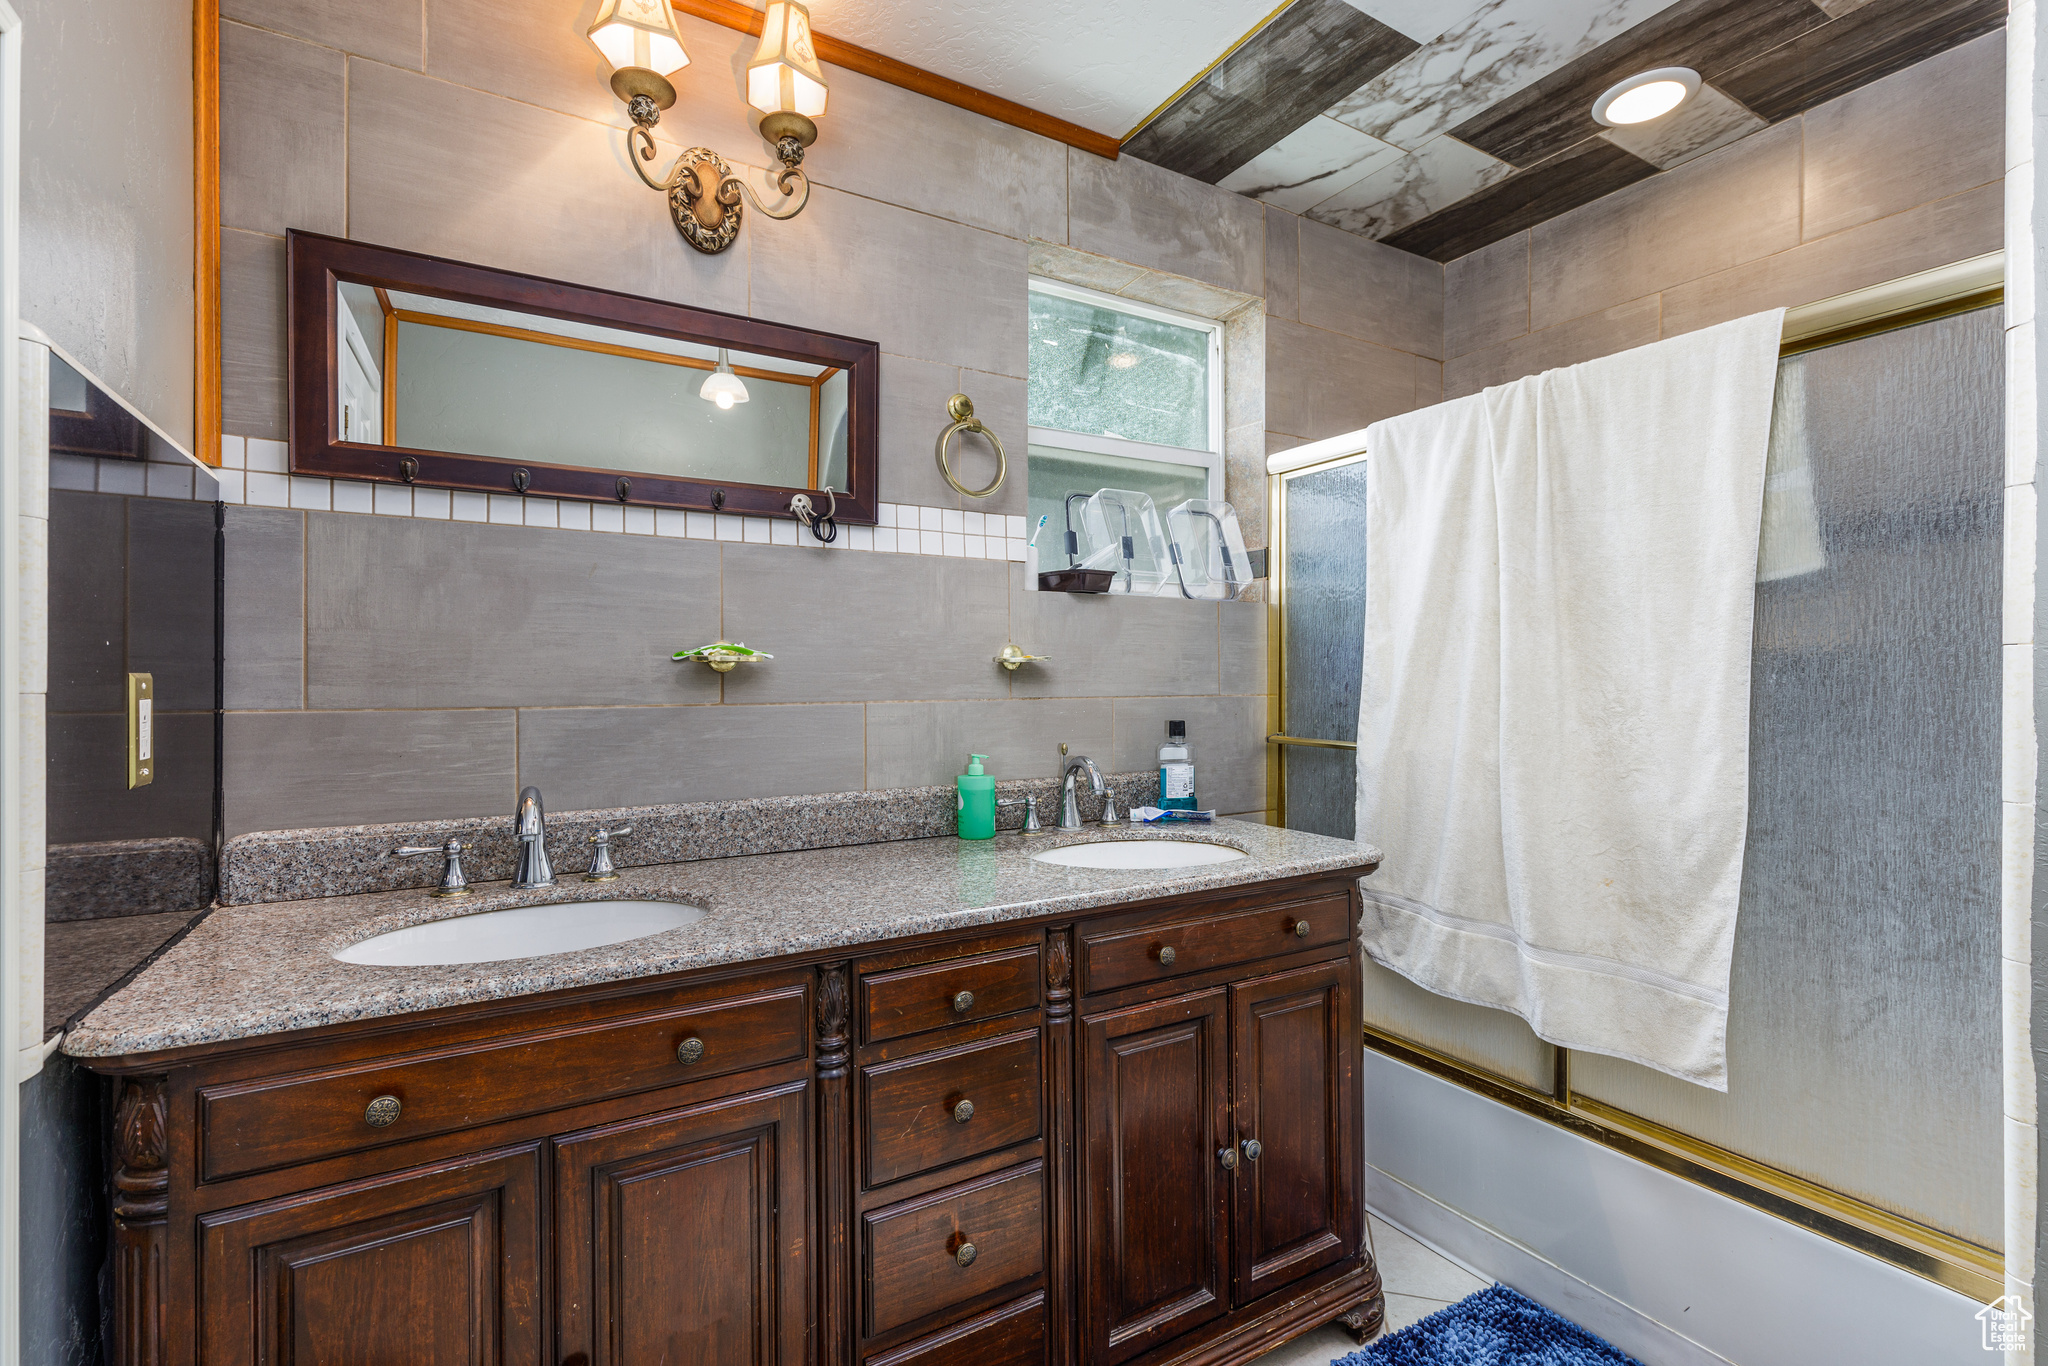 Bathroom with double vanity, tile walls, and enclosed tub / shower combo